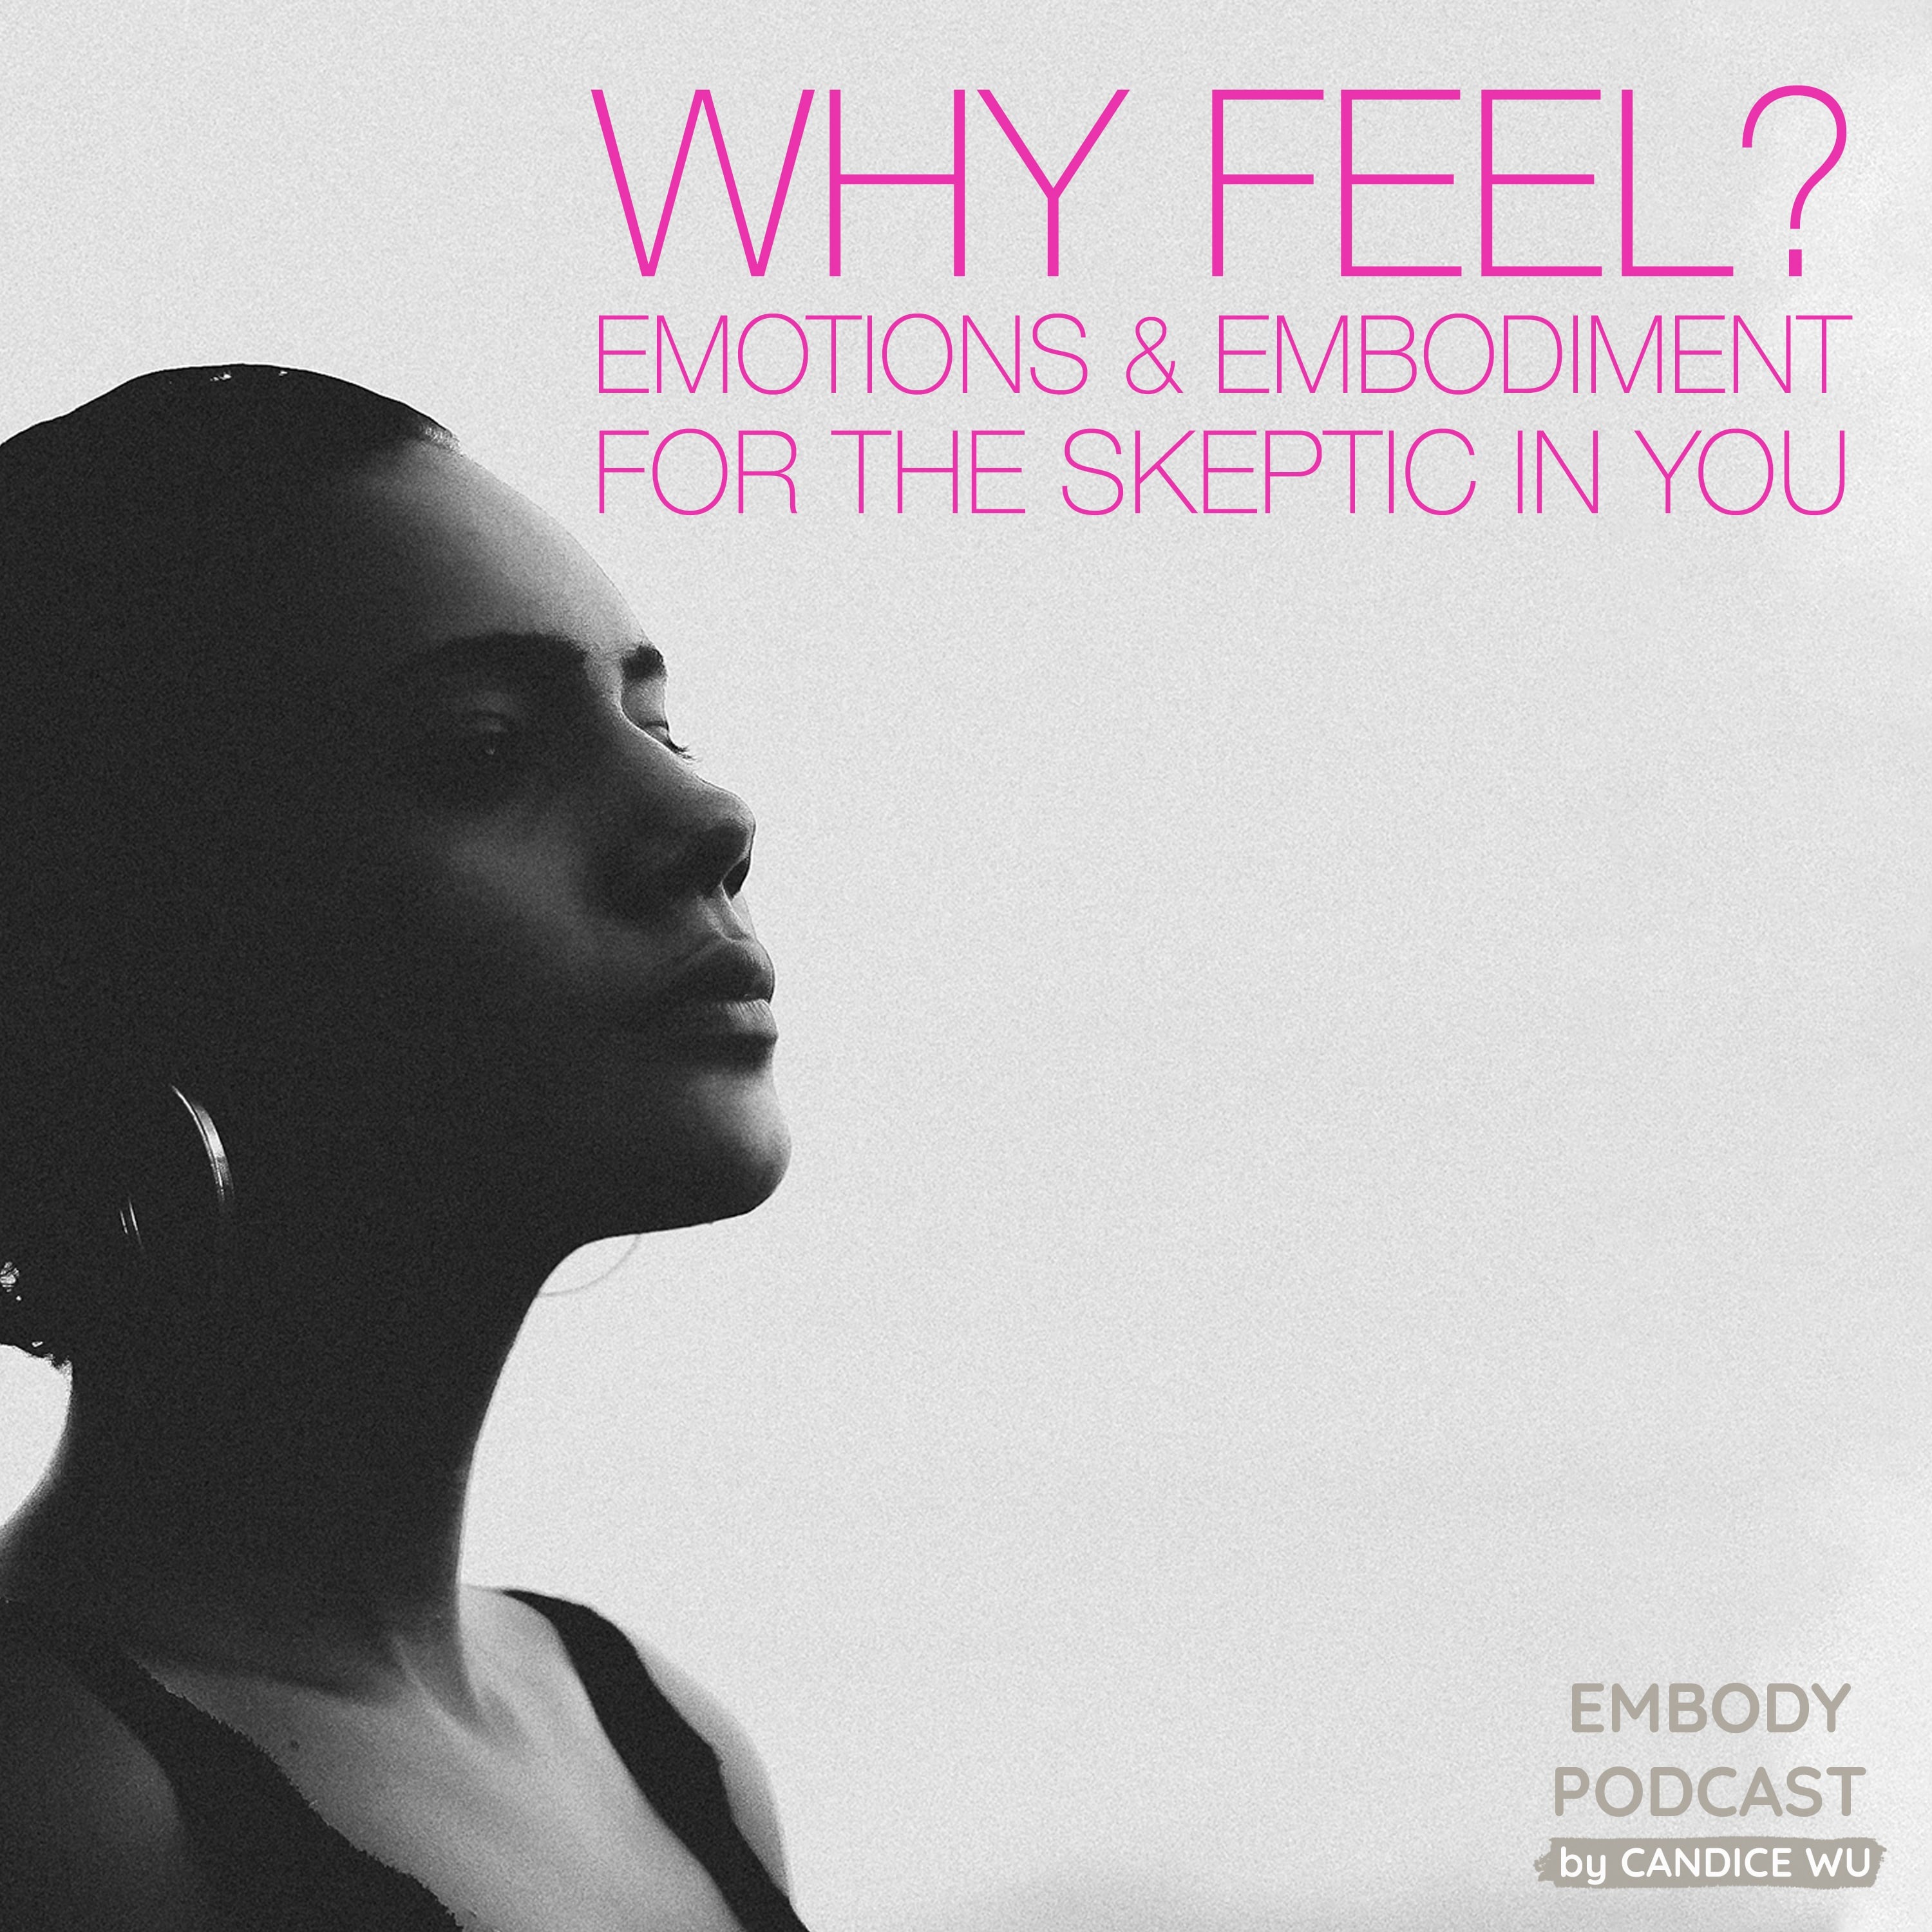 59: Why Feel? Emotions & Embodiment for the Skeptic in You